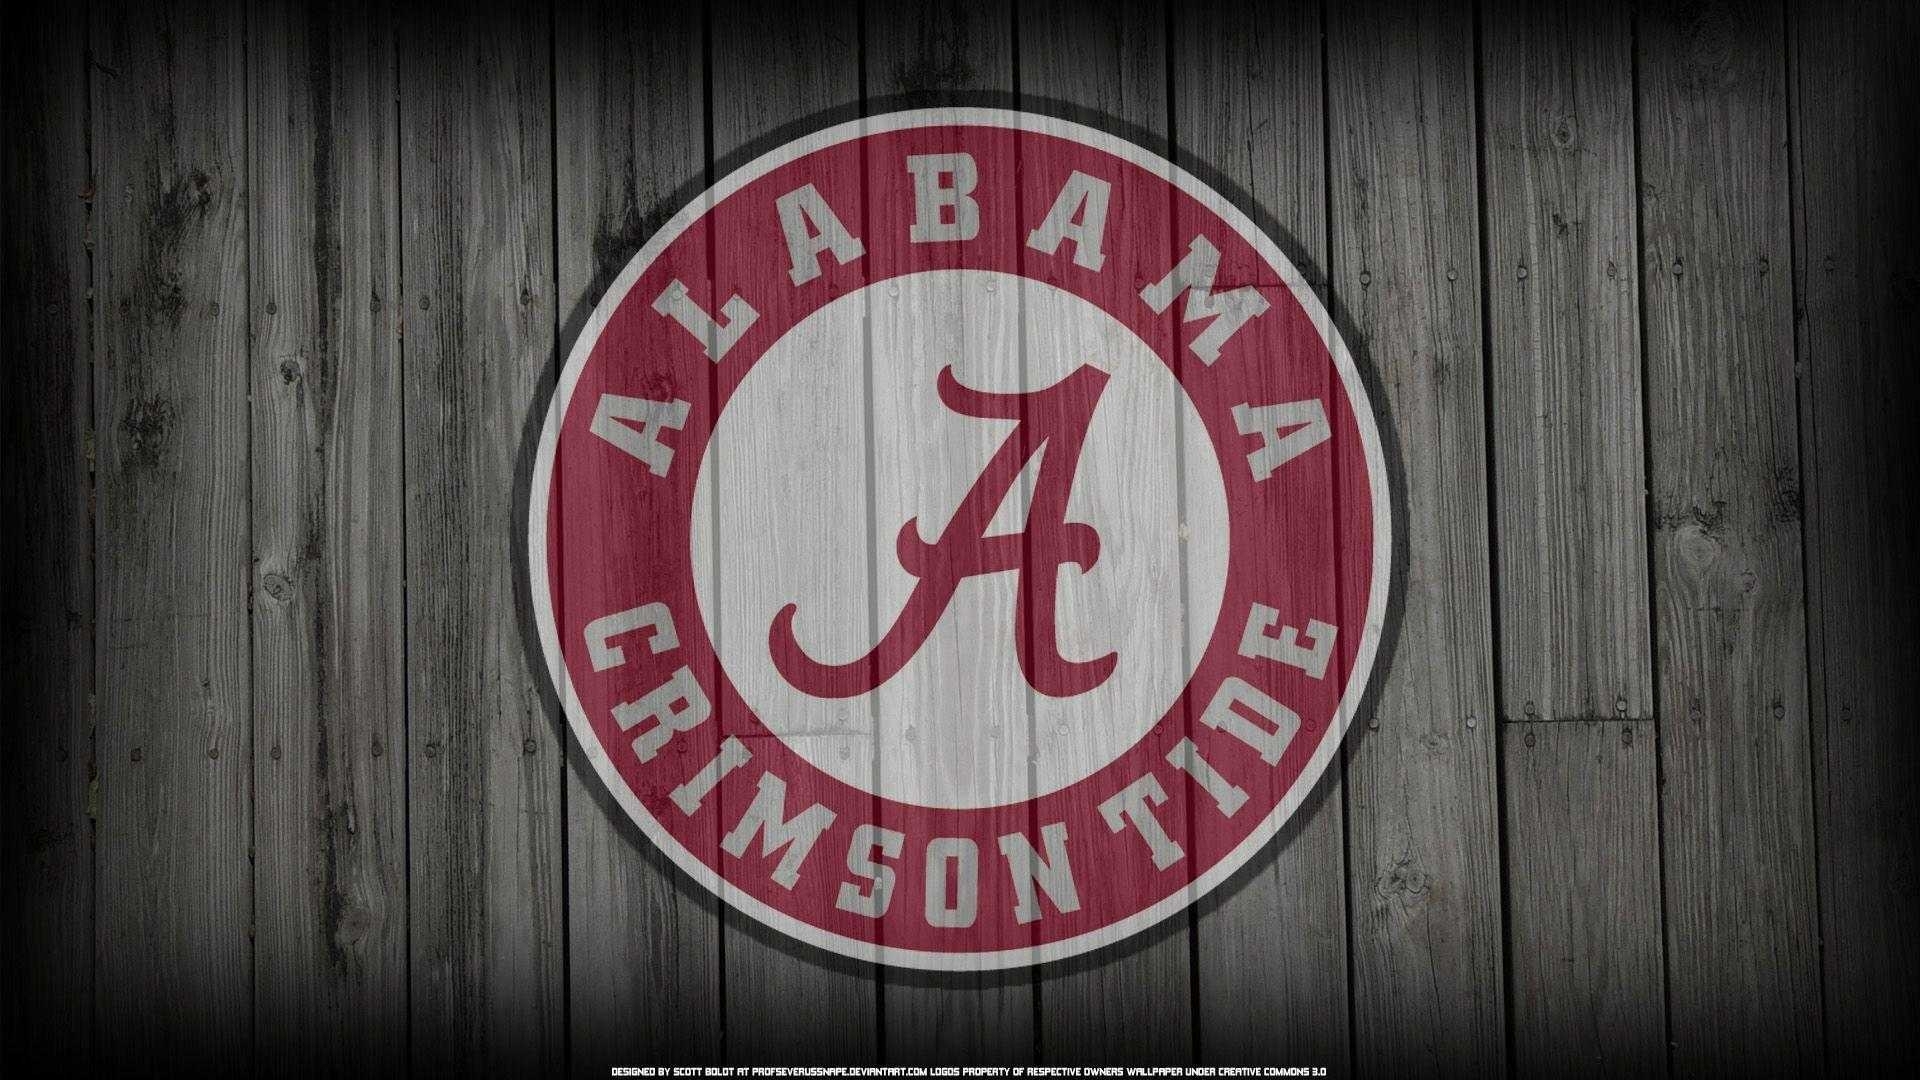 10 Latest Alabama Football Desktop Wallpapers FULL HD 1920×1080 For PC Background